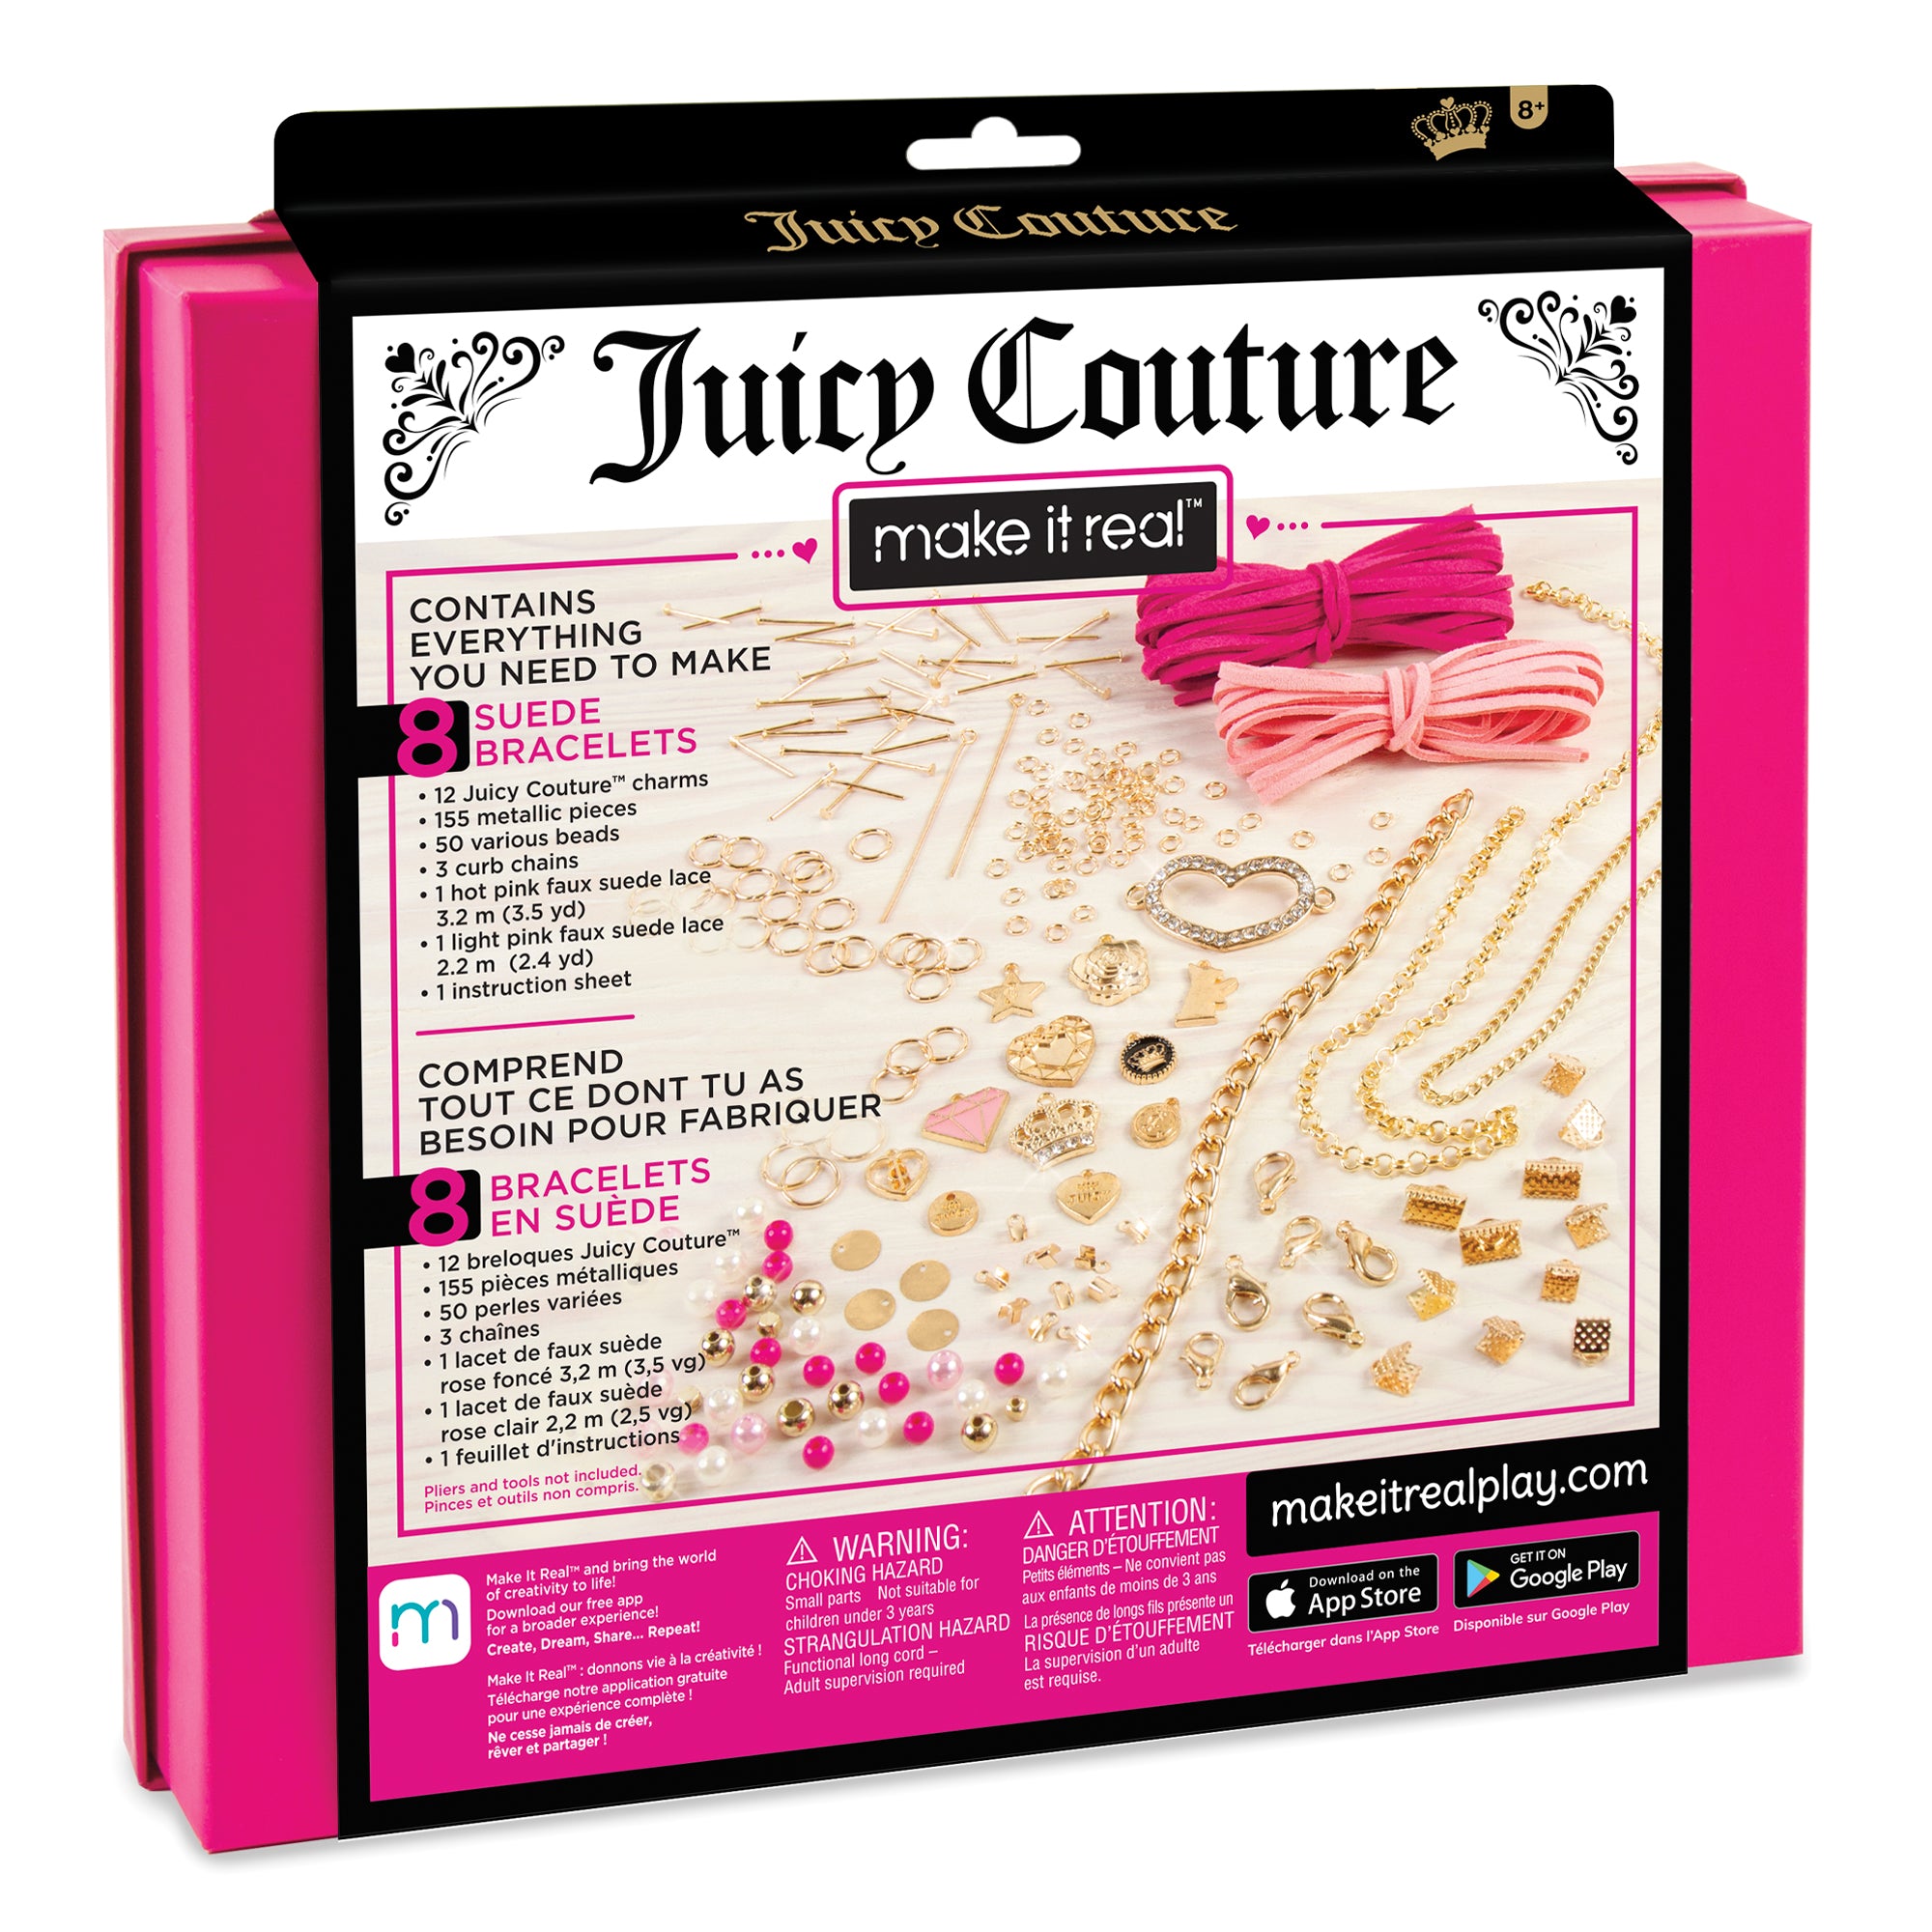 Juicy Couture™ Sweet Suede Bracelets – Make It Real